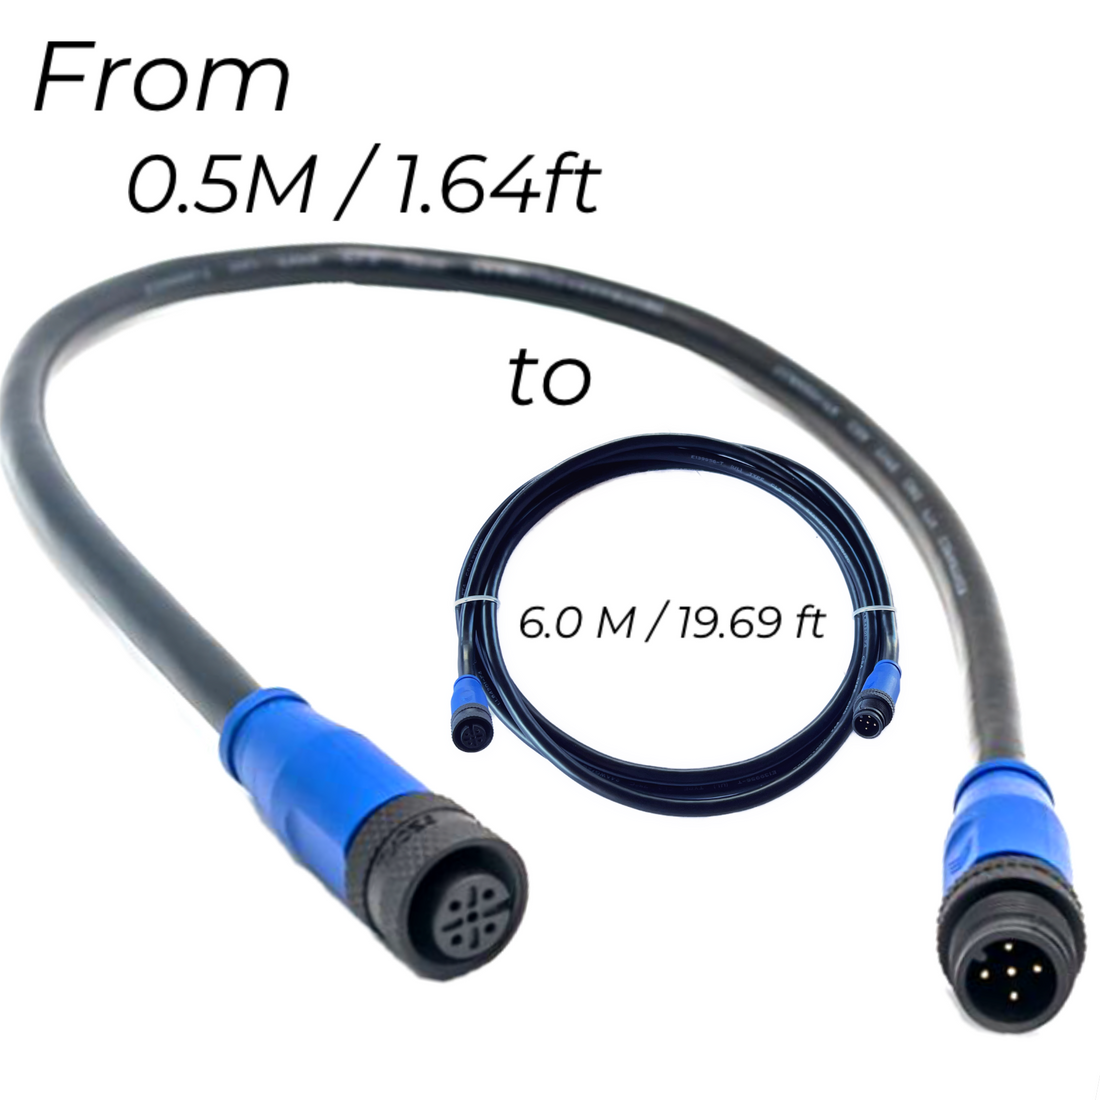 NMEA 2000 Backbone Drop Cable (0.5 M/1.64 ft) to (6.0 M/19.69 ft)